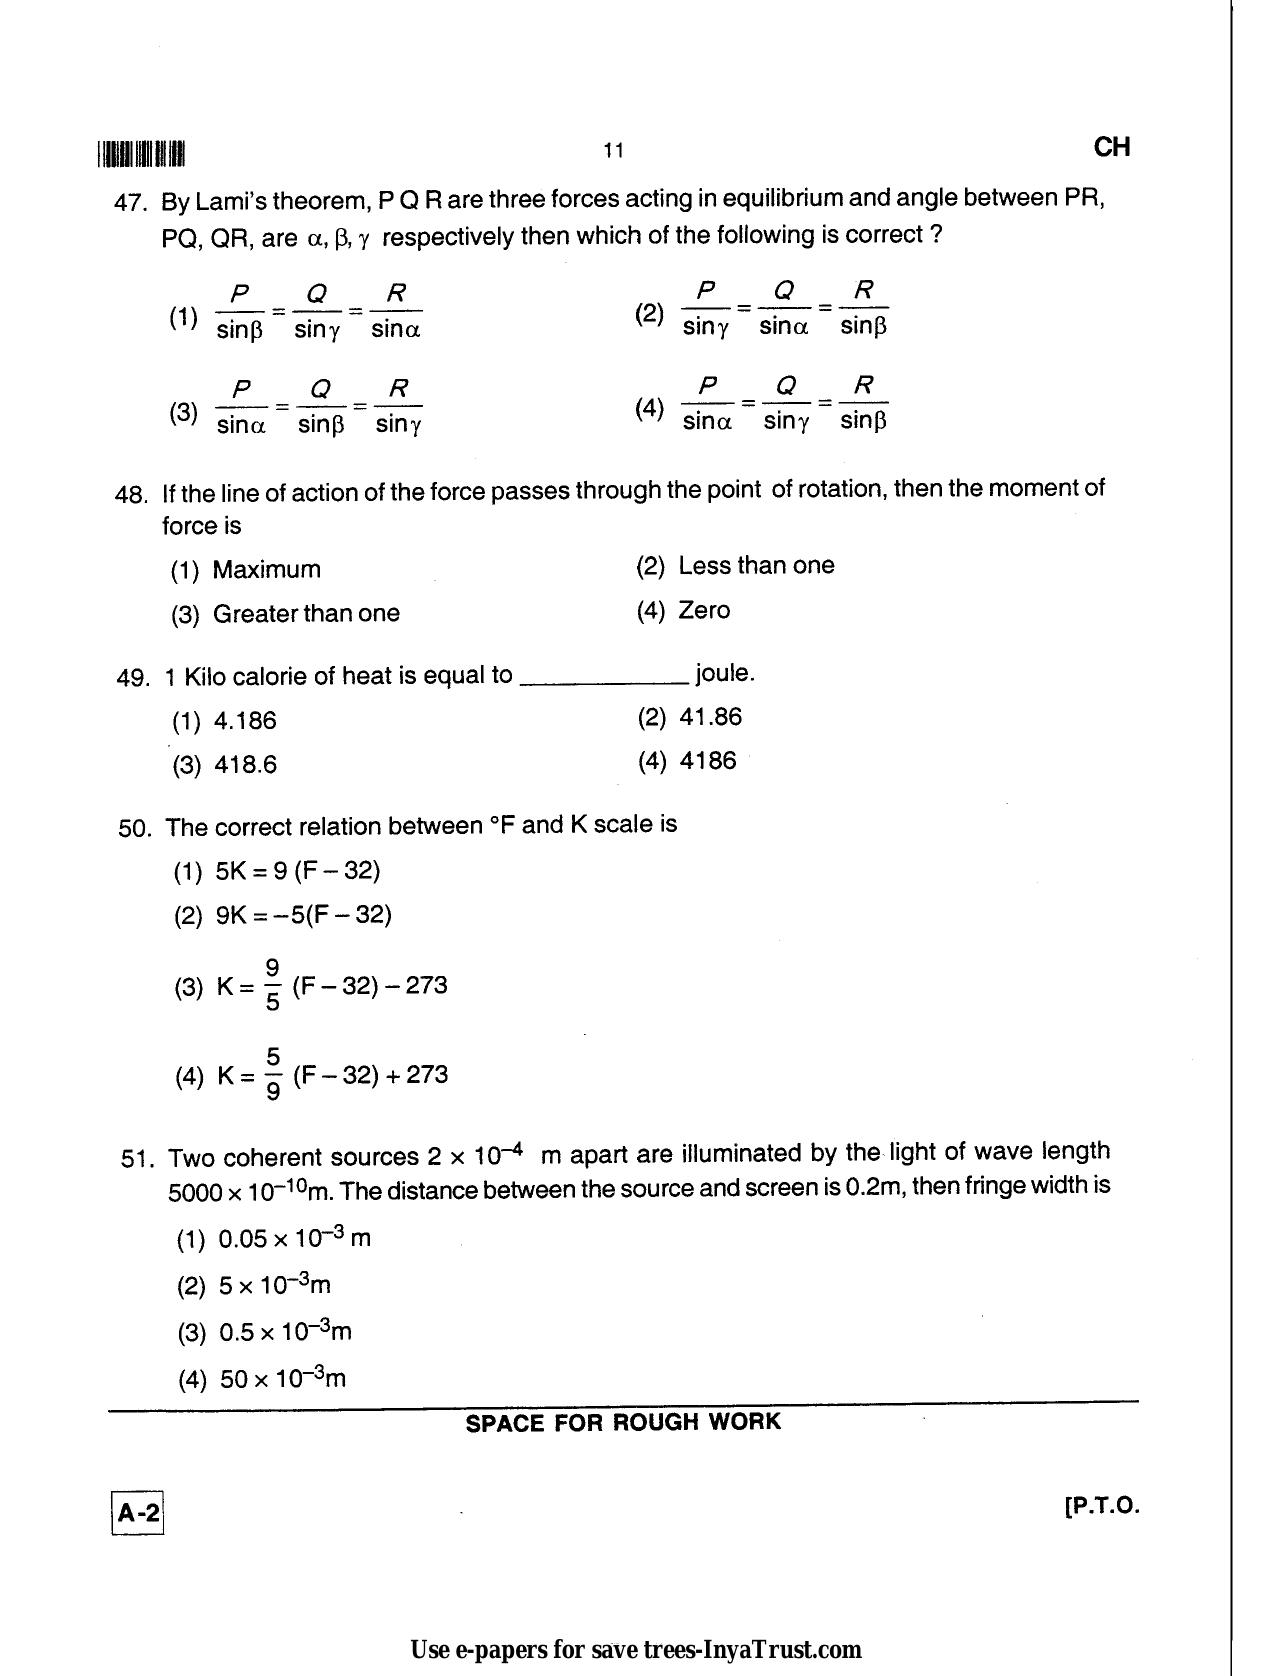 Karnataka Diploma CET- 2013 Chemical Engineering / Polymer Technology Question Paper - Page 11